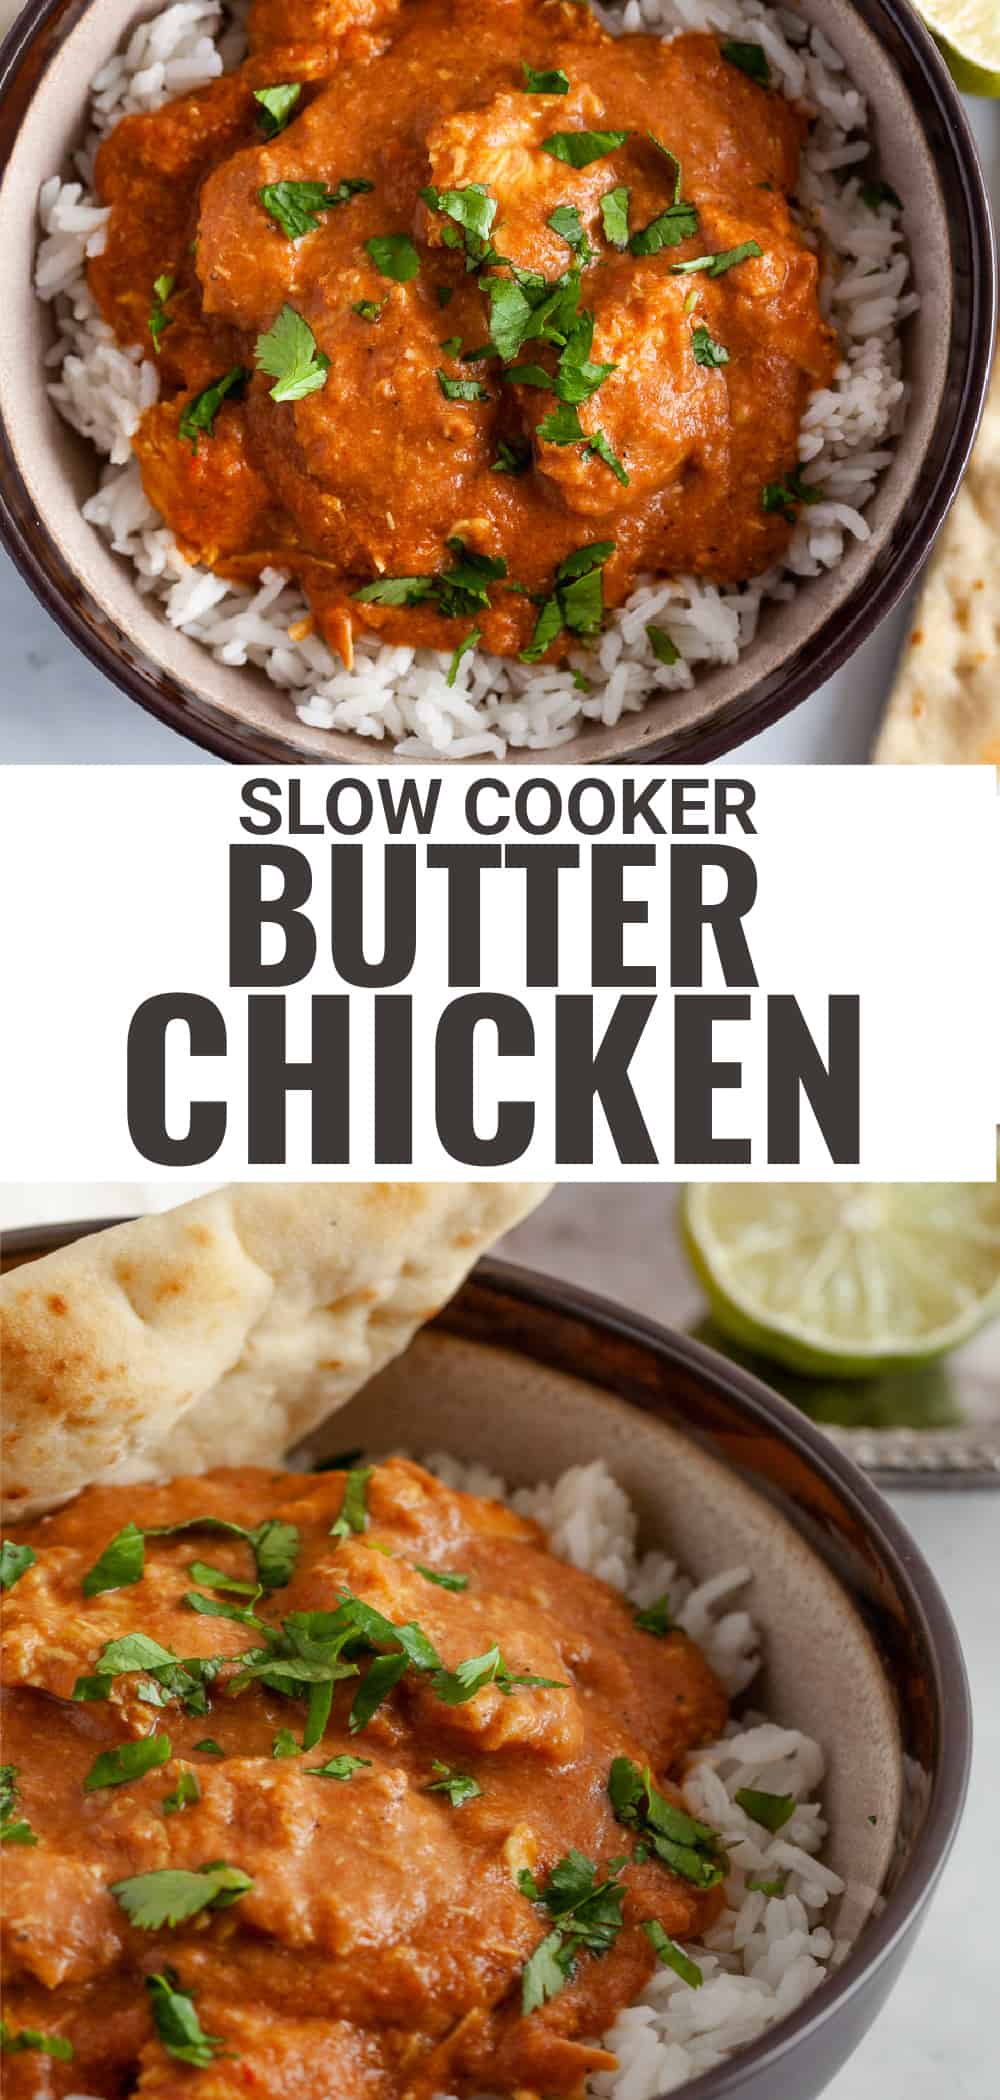 Slow Cooker Butter Chicken (Whole30, Low Carb) | Thyme & JOY